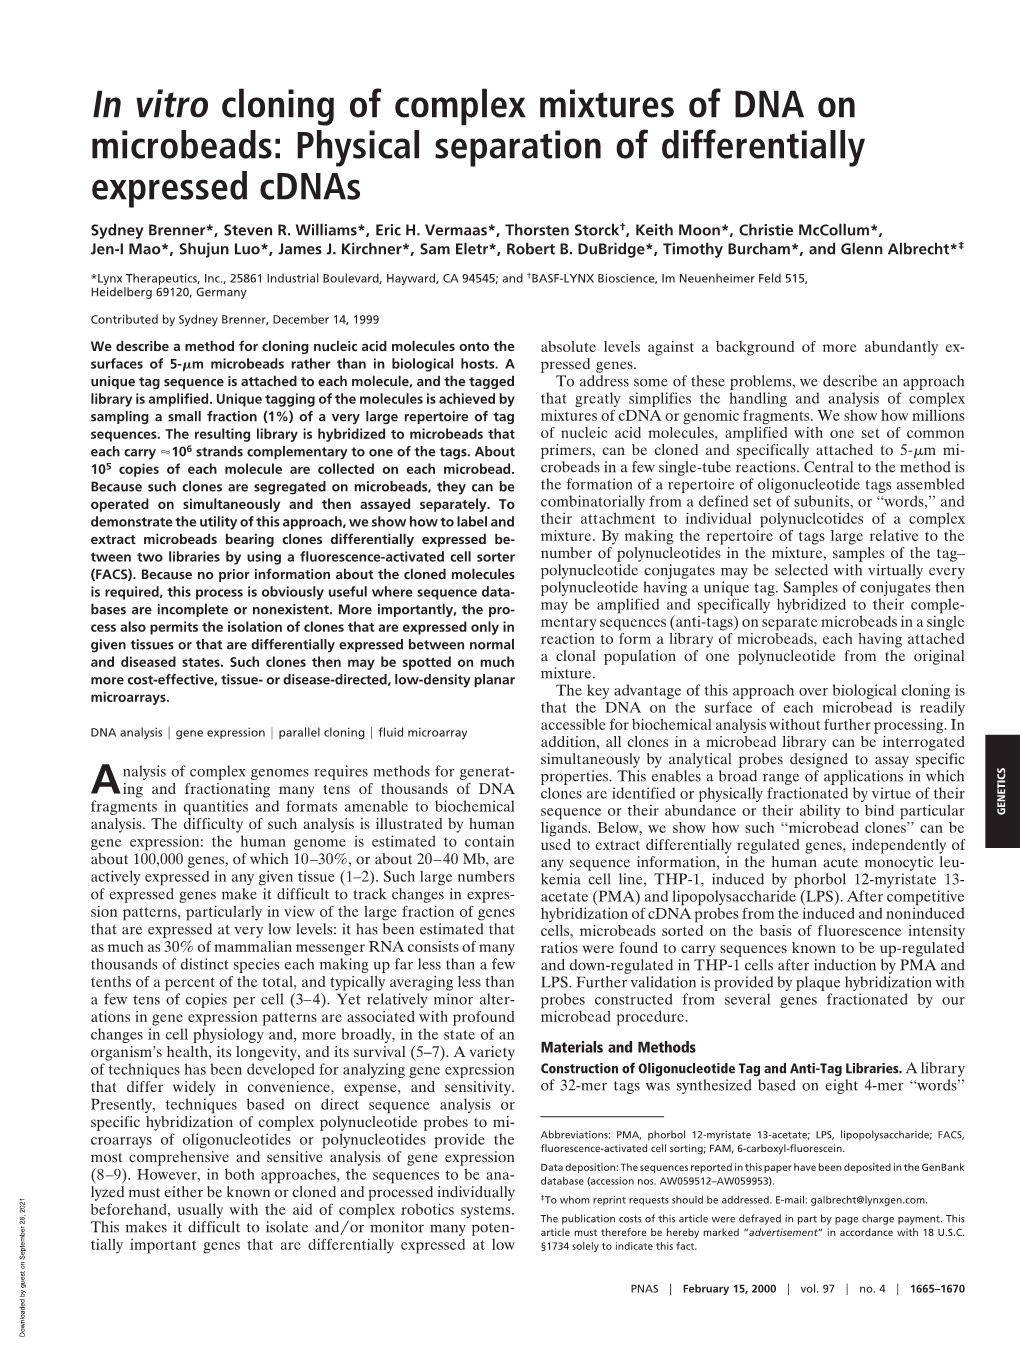 In Vitro Cloning of Complex Mixtures of DNA on Microbeads: Physical Separation of Differentially Expressed Cdnas